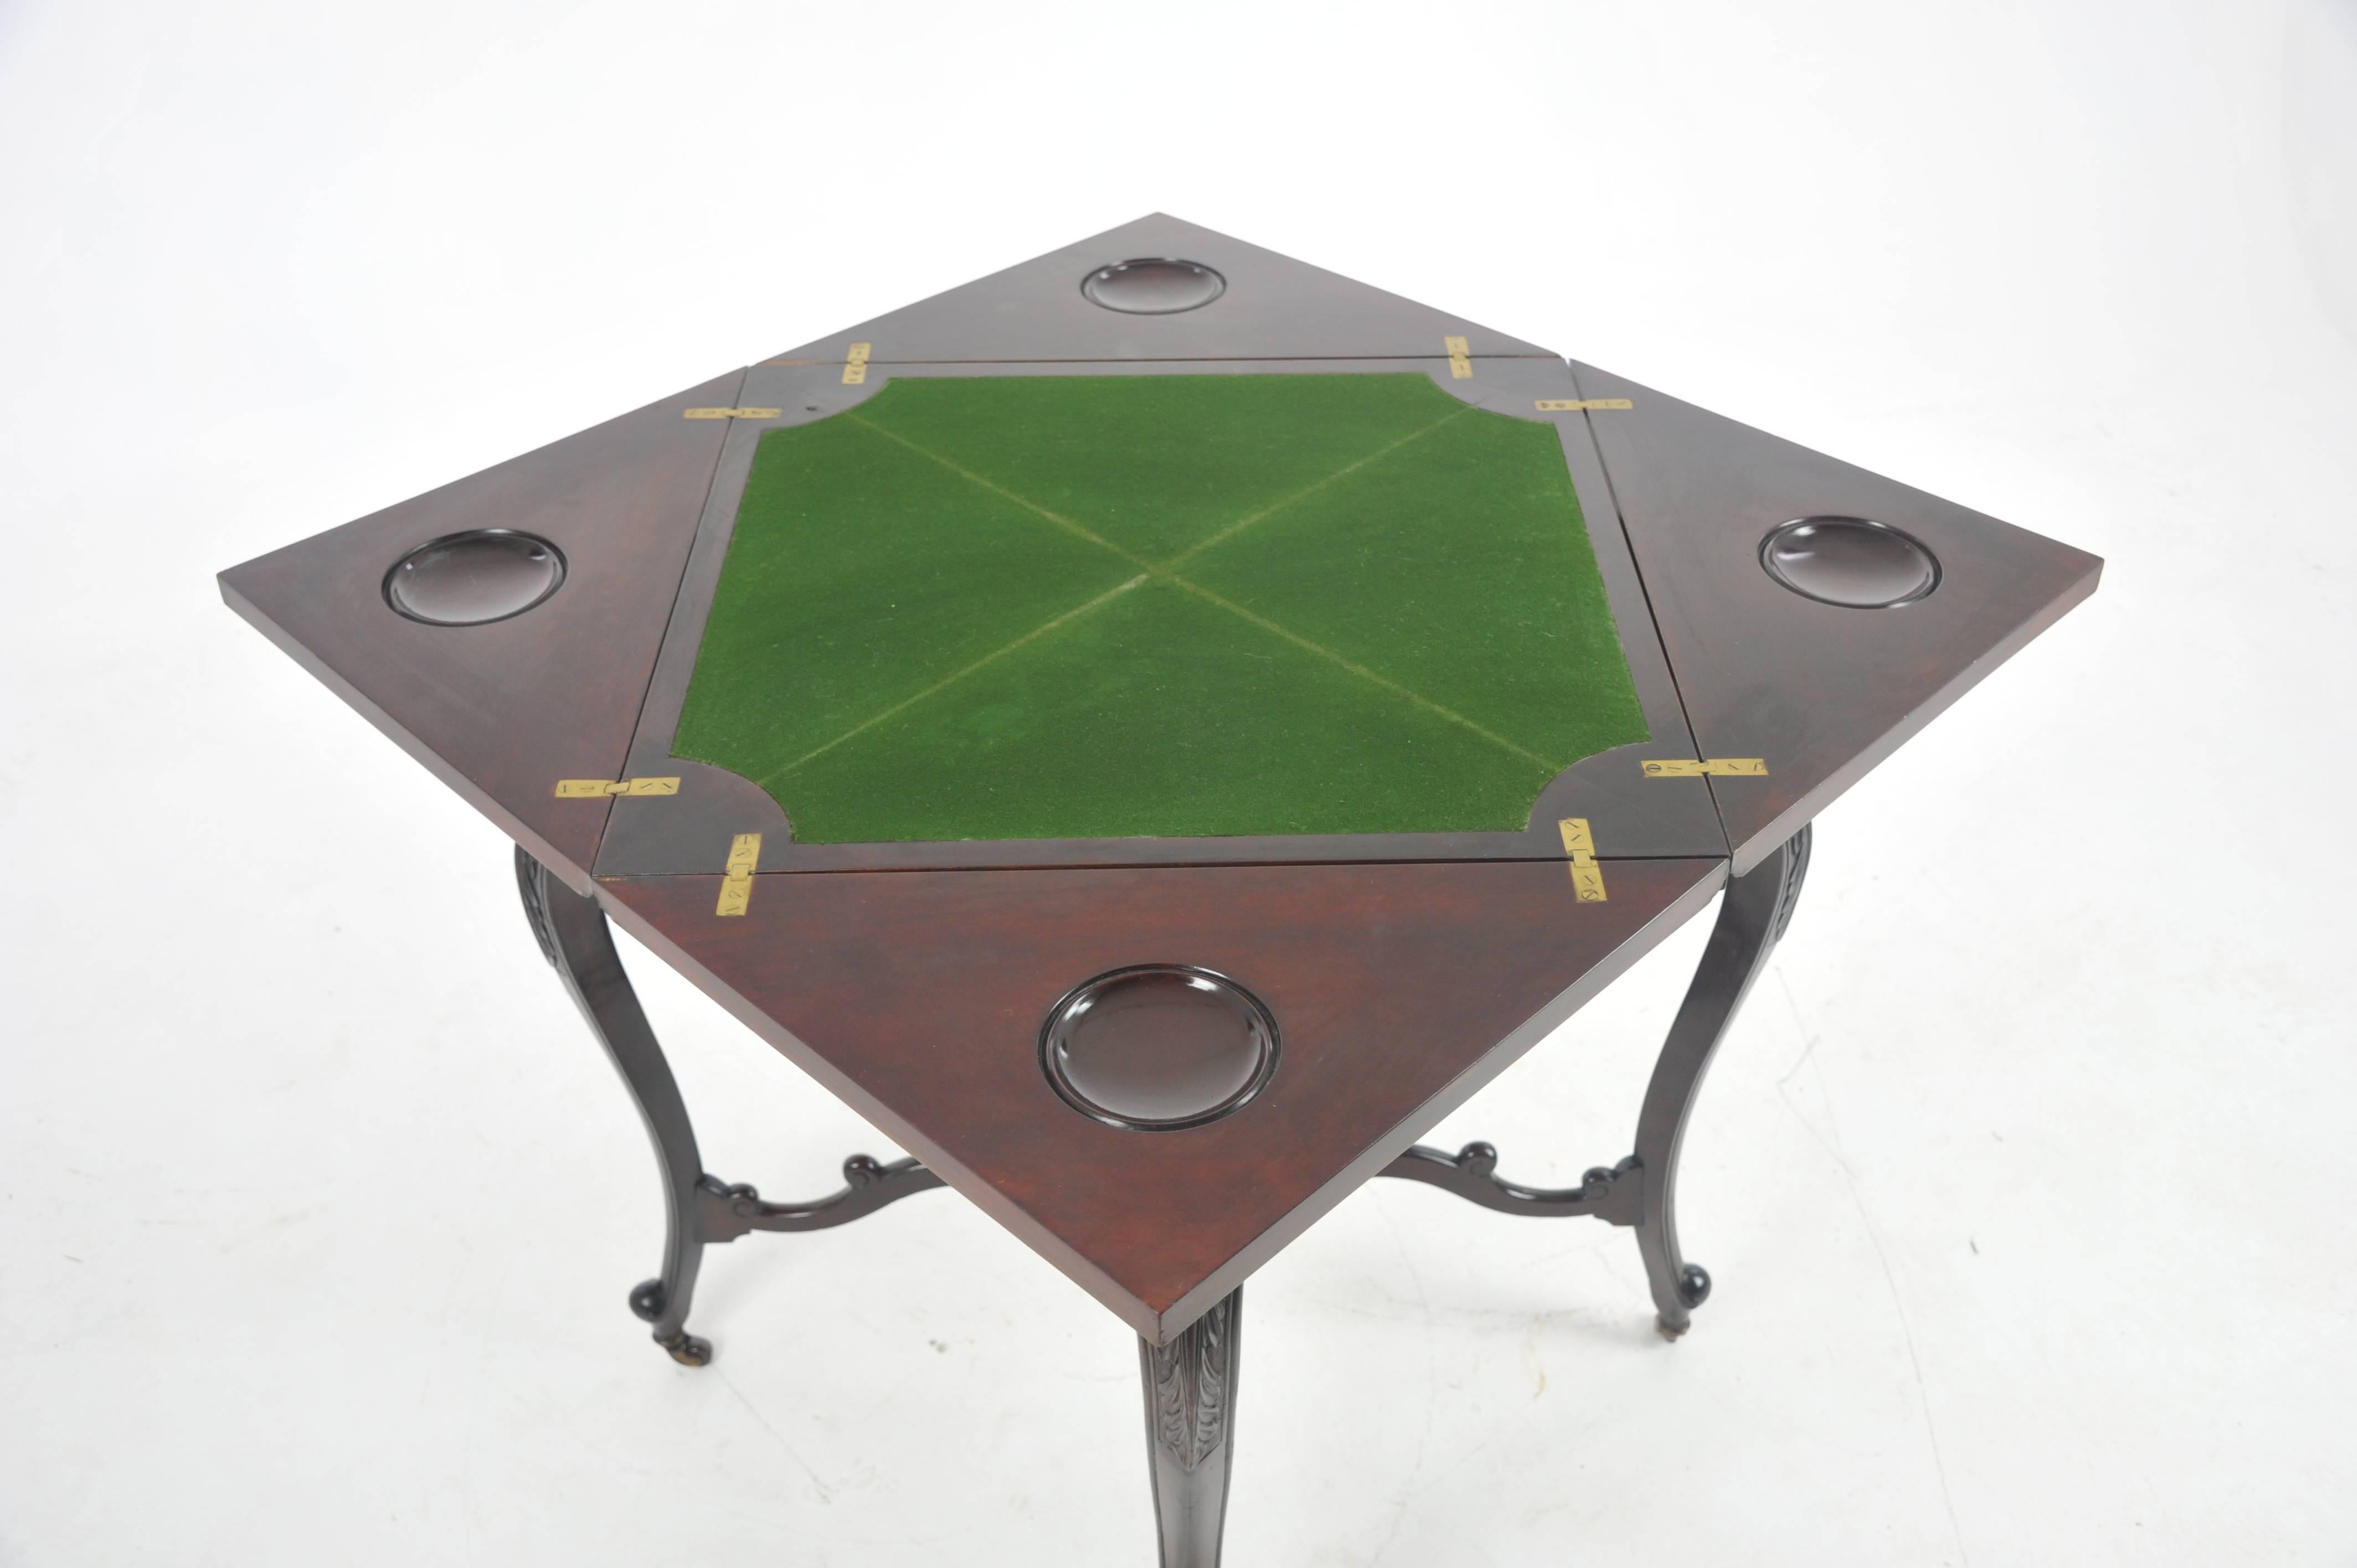 Antique Card Table, Envelope Top Table, Victorian Card Table,Mahogany, Scotland 1900, B1115

Scotland, 1900
Solid Mahogany
Original Finish
Table Top with Envelope Design
When Opened shows baize surface to the Center and Four Dished